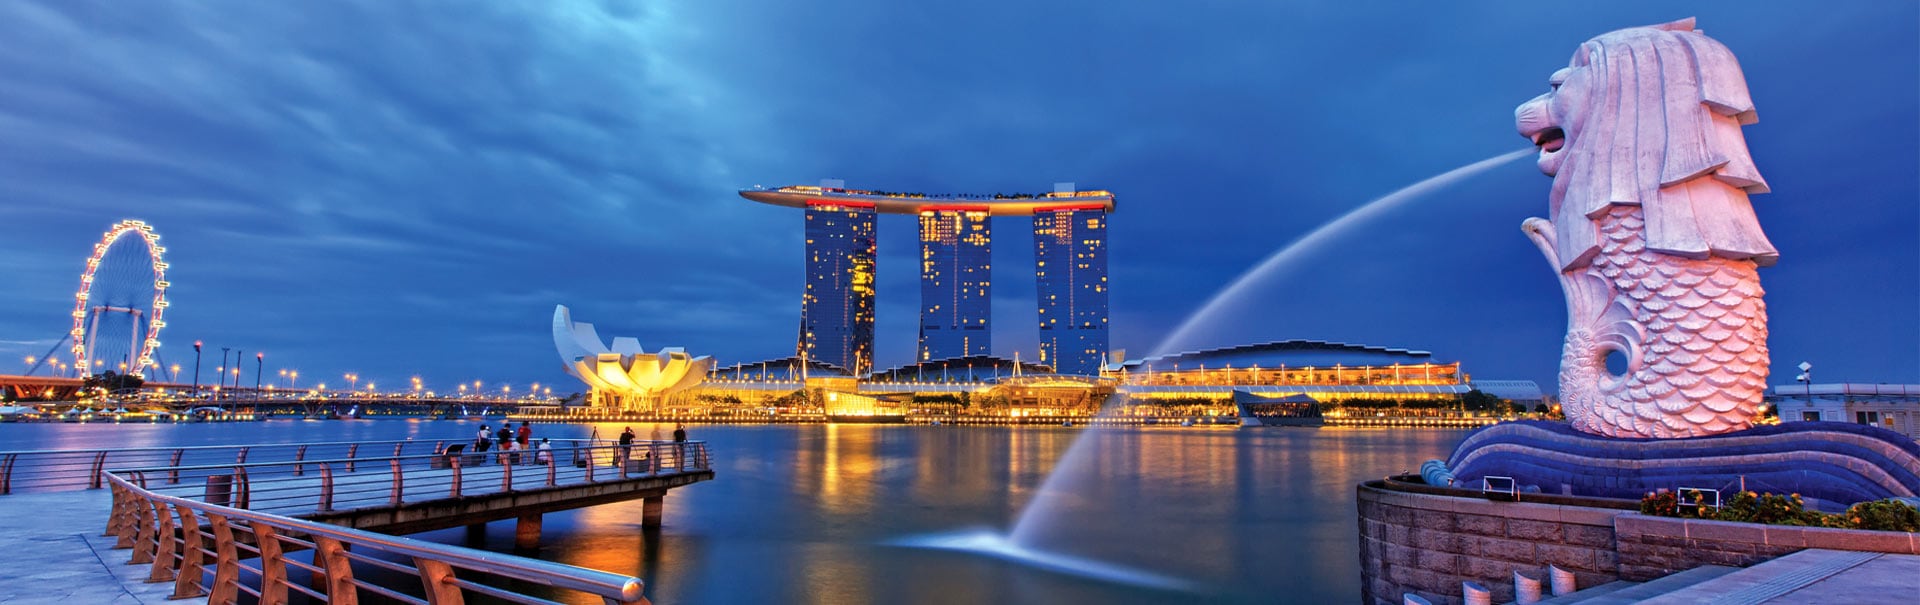 singapore tour packages veena world